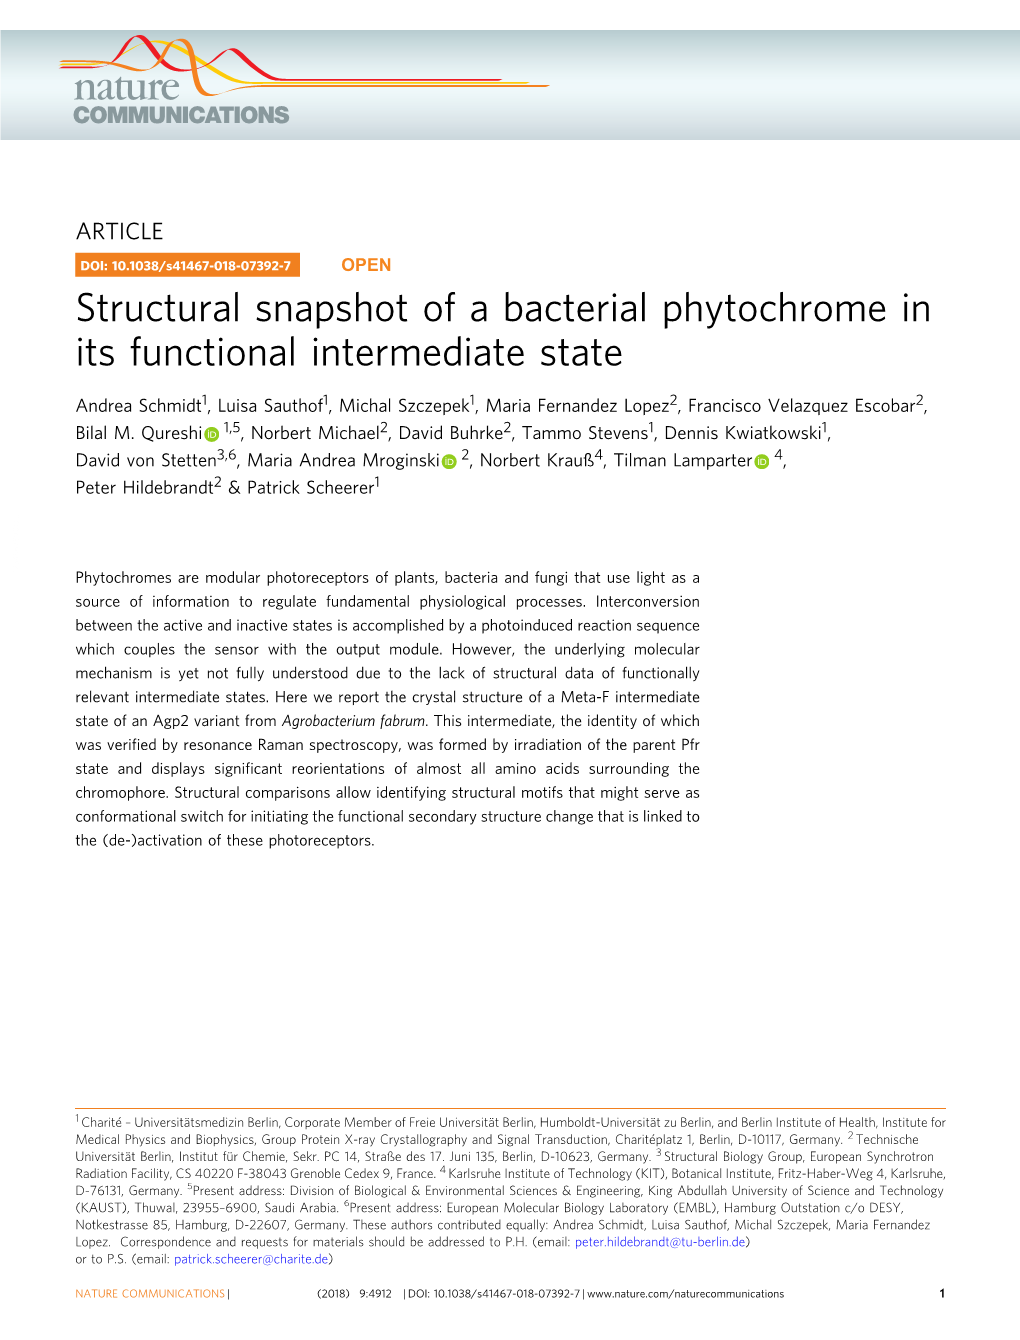 Structural Snapshot of a Bacterial Phytochrome in Its Functional Intermediate State